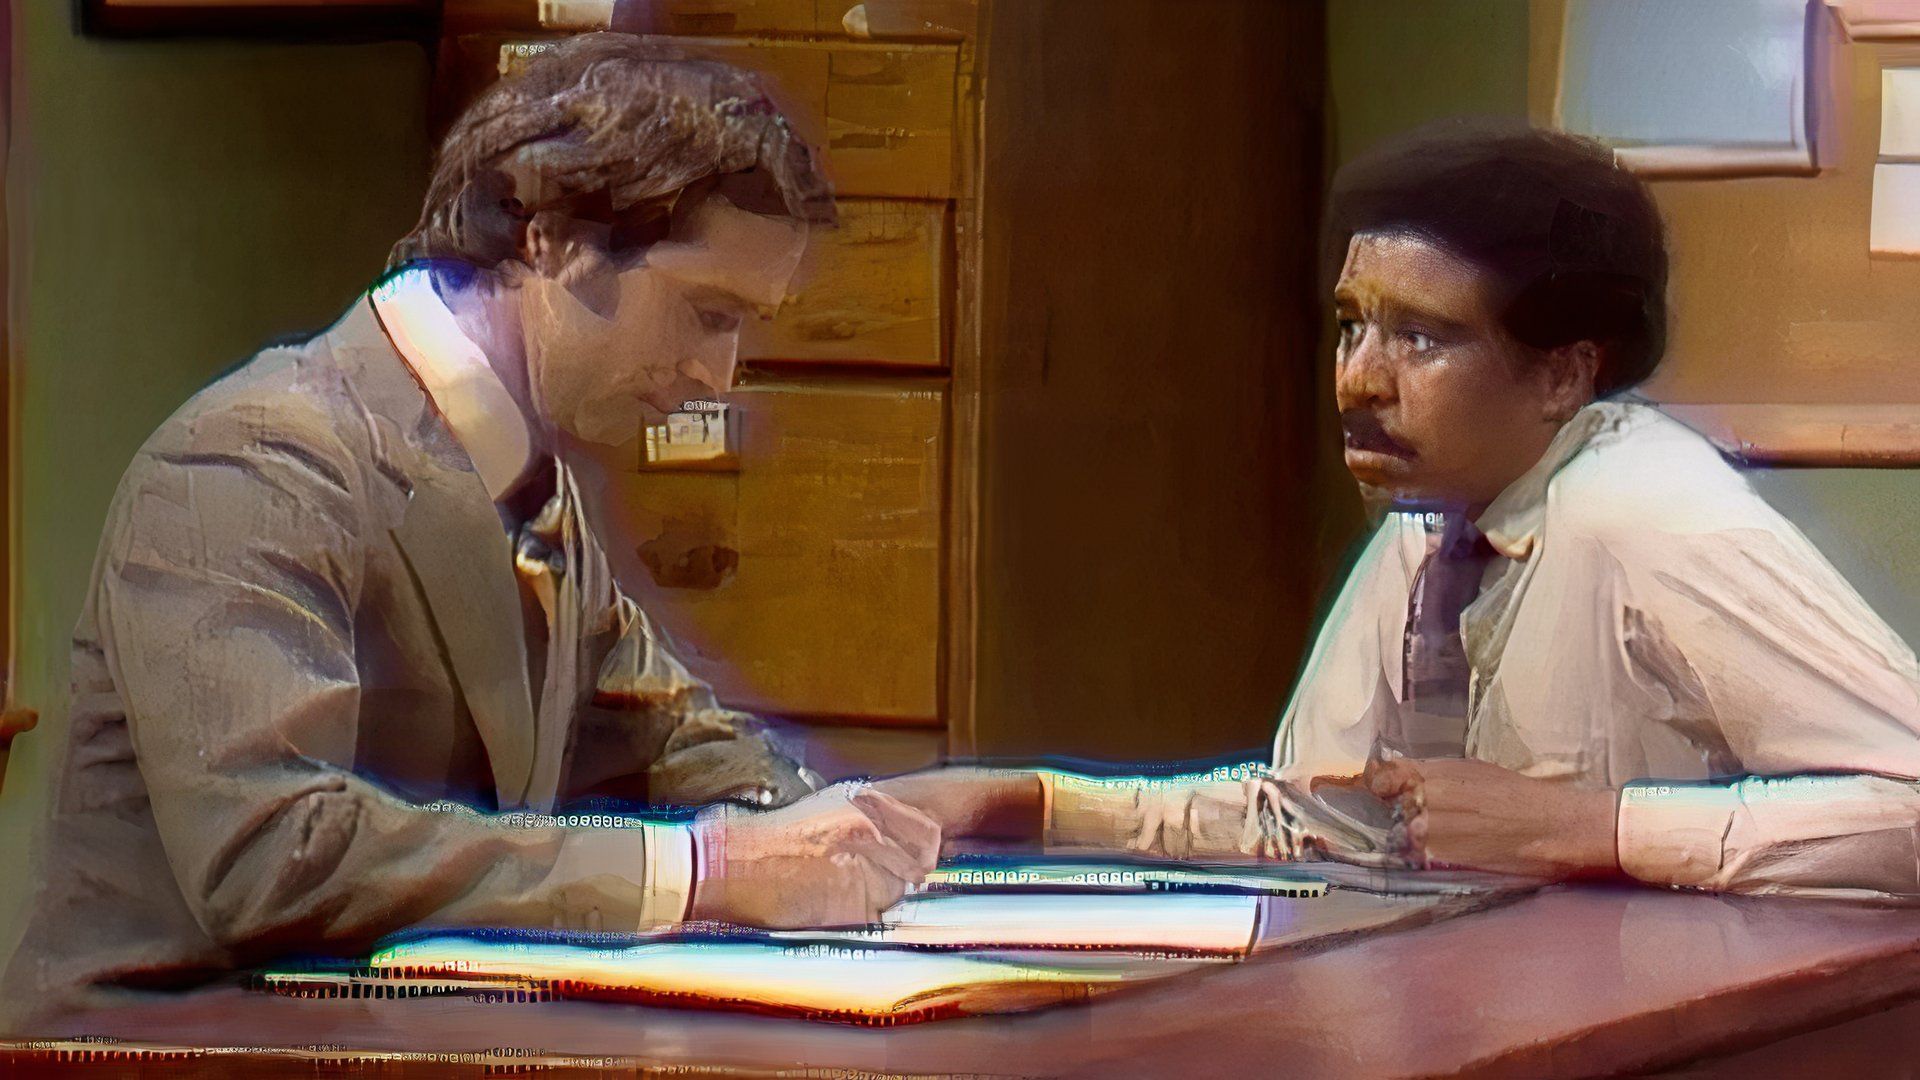 chevy chase interviews richard pryor in the sketch word association of saturday night live